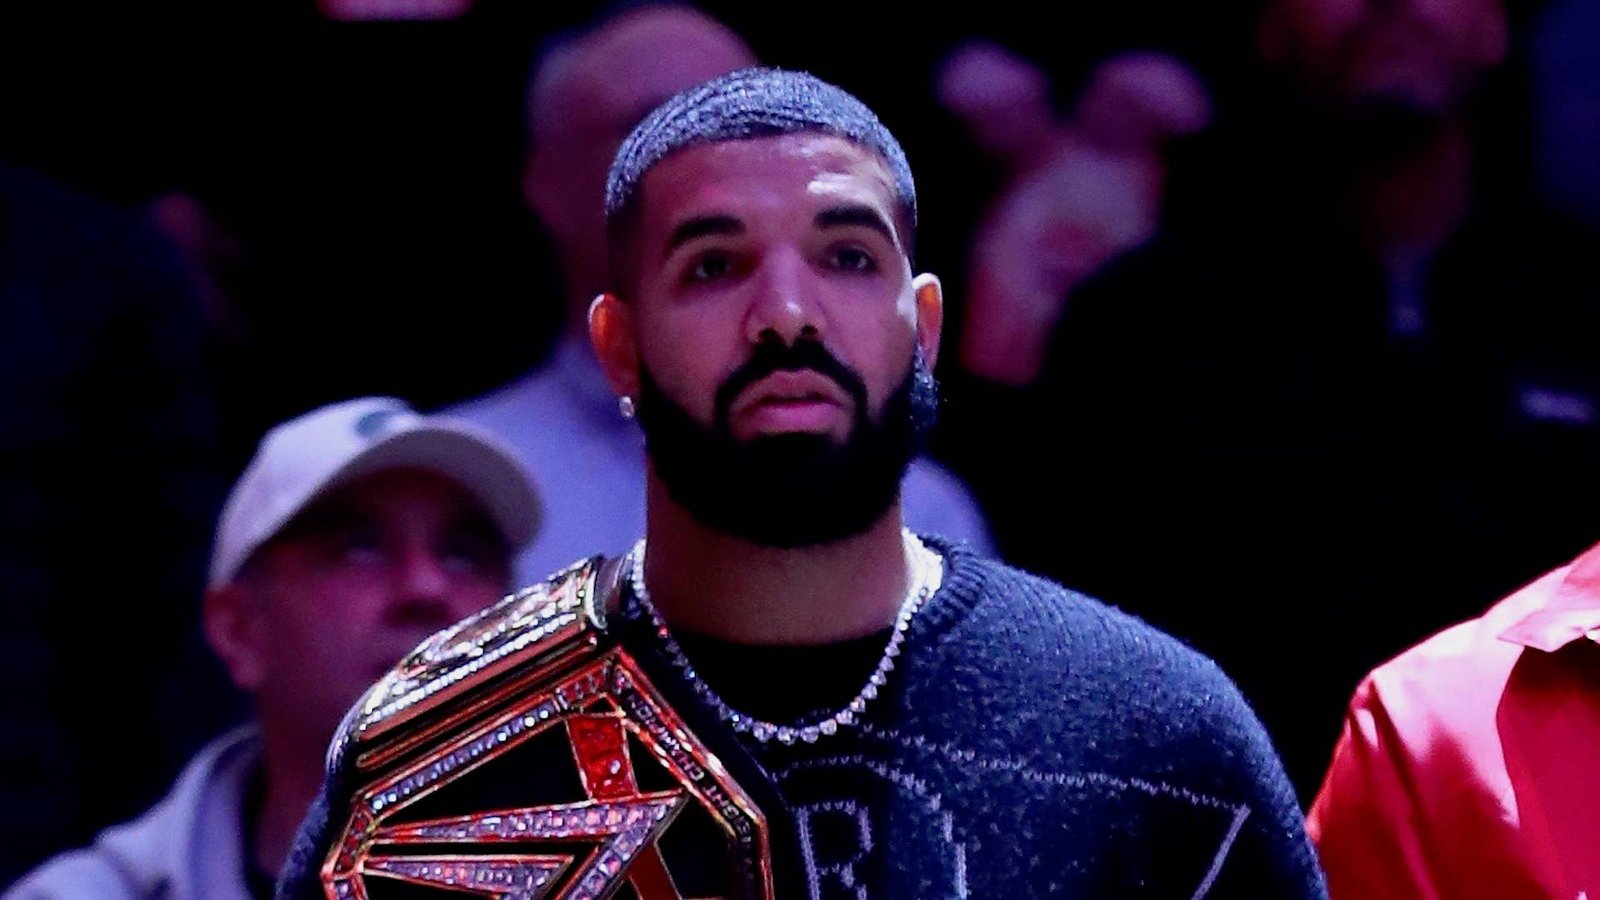 Drake's Ultimatum: Condition for Exiting Music Amid Escalating